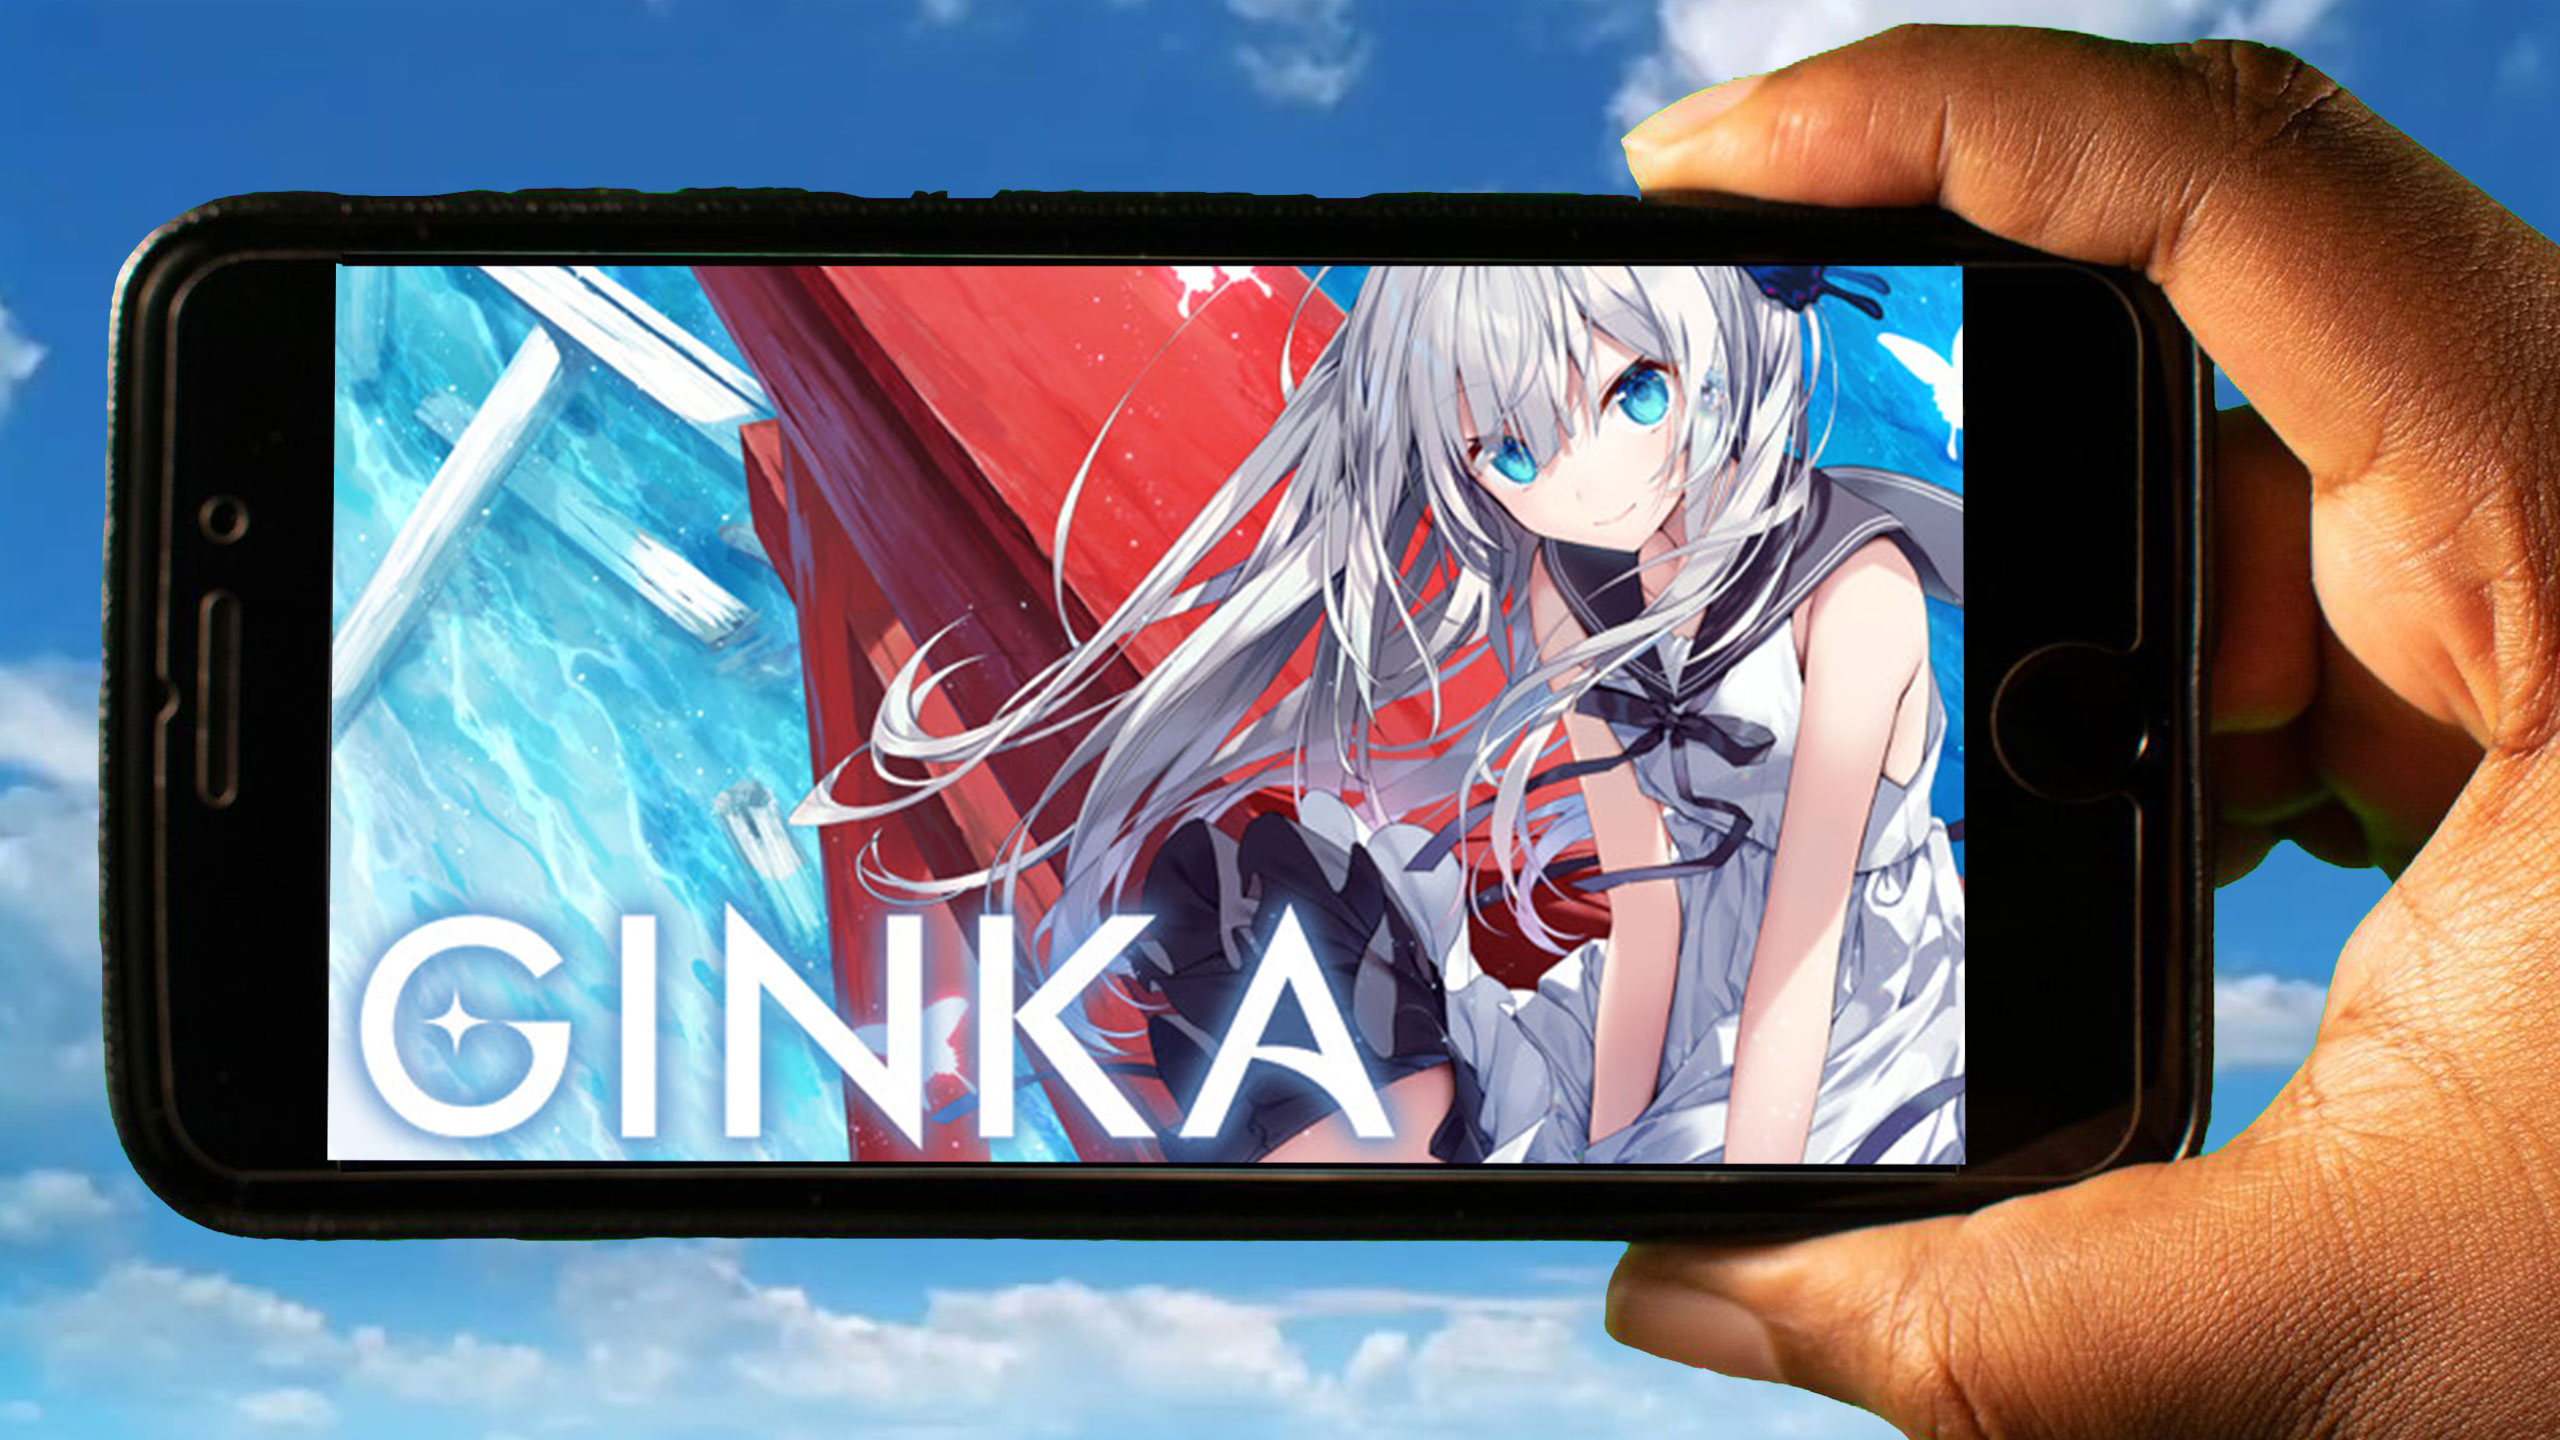 GINKA Mobile – How to play on an Android or iOS phone?